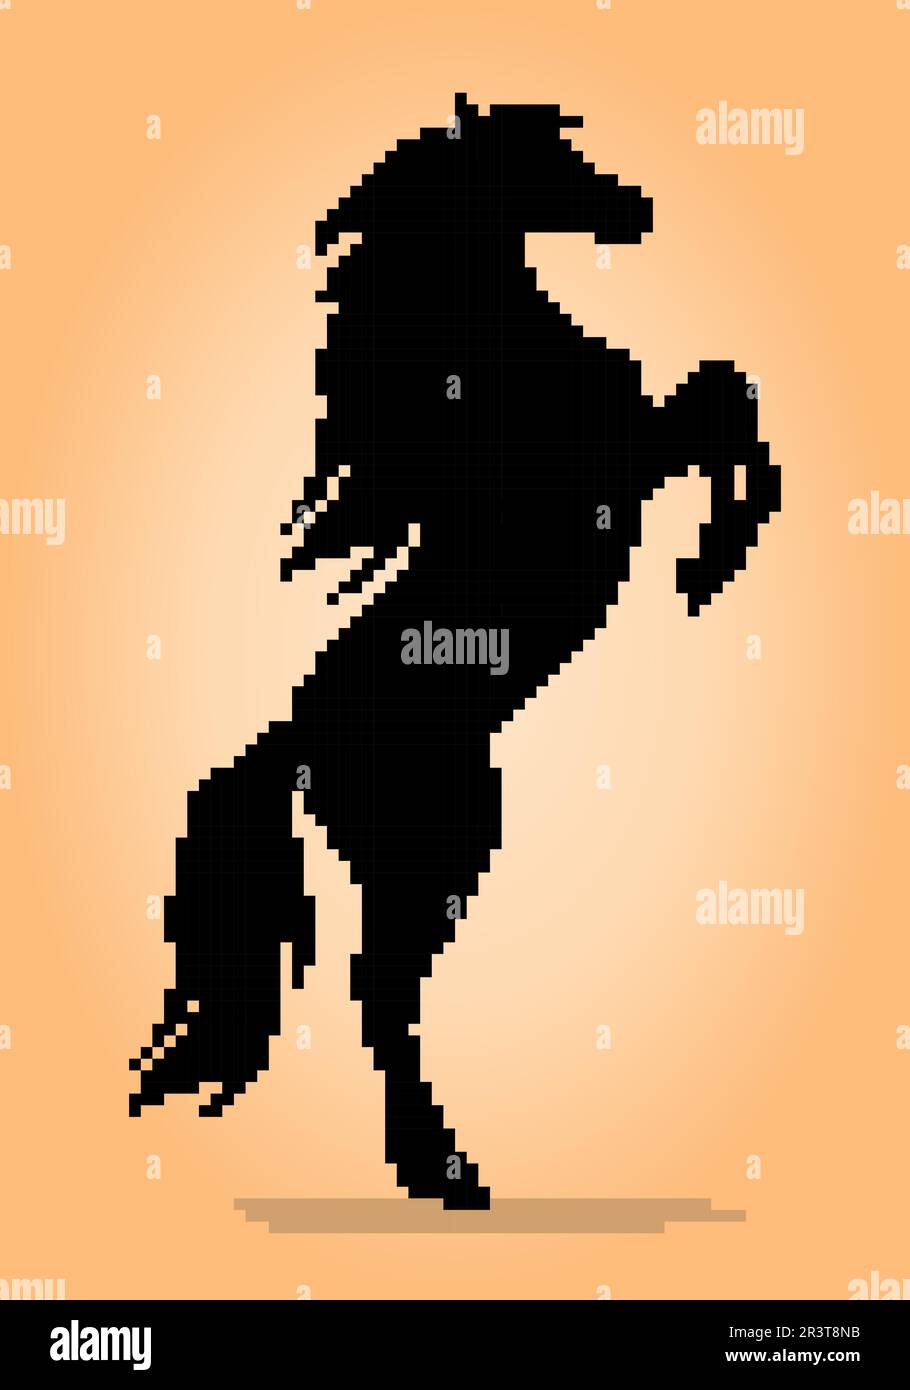 8 bit pixels of black horse. silhouette for game assets and cross stitch patterns in vector illustrations. Stock Vector